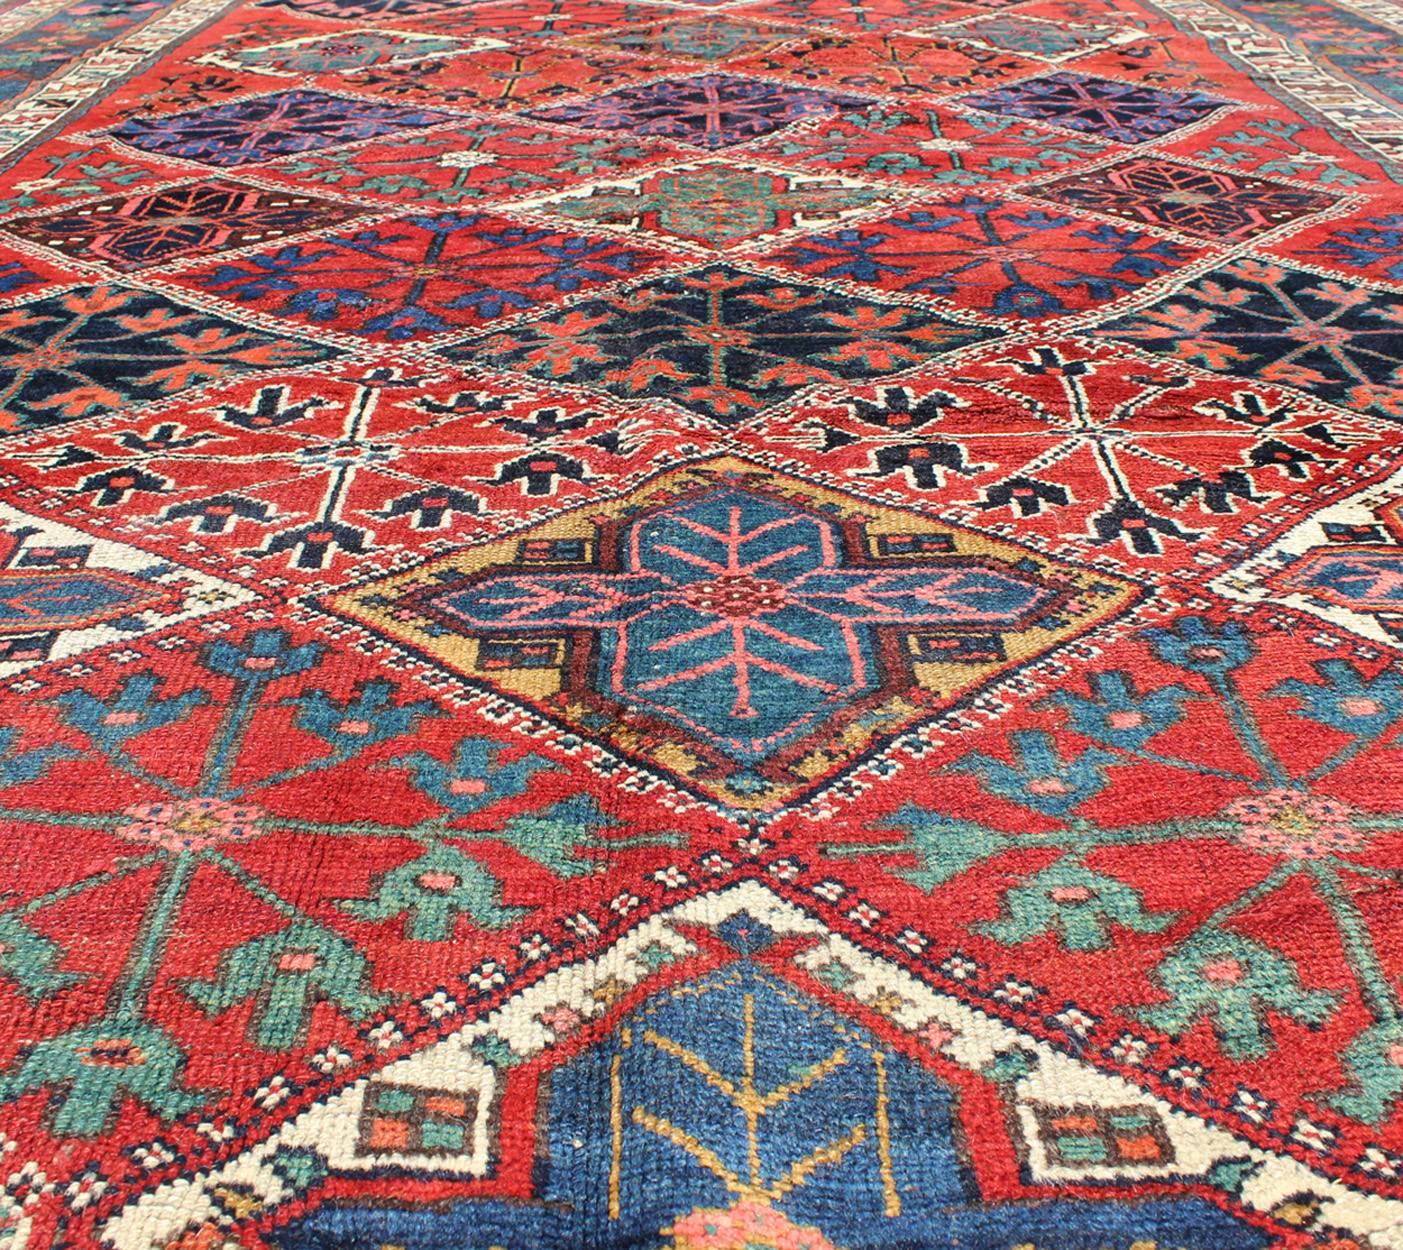 Tribal Antique Persian Qashqai Rug with Tulips, Diamond Patterns and Star Motifs For Sale